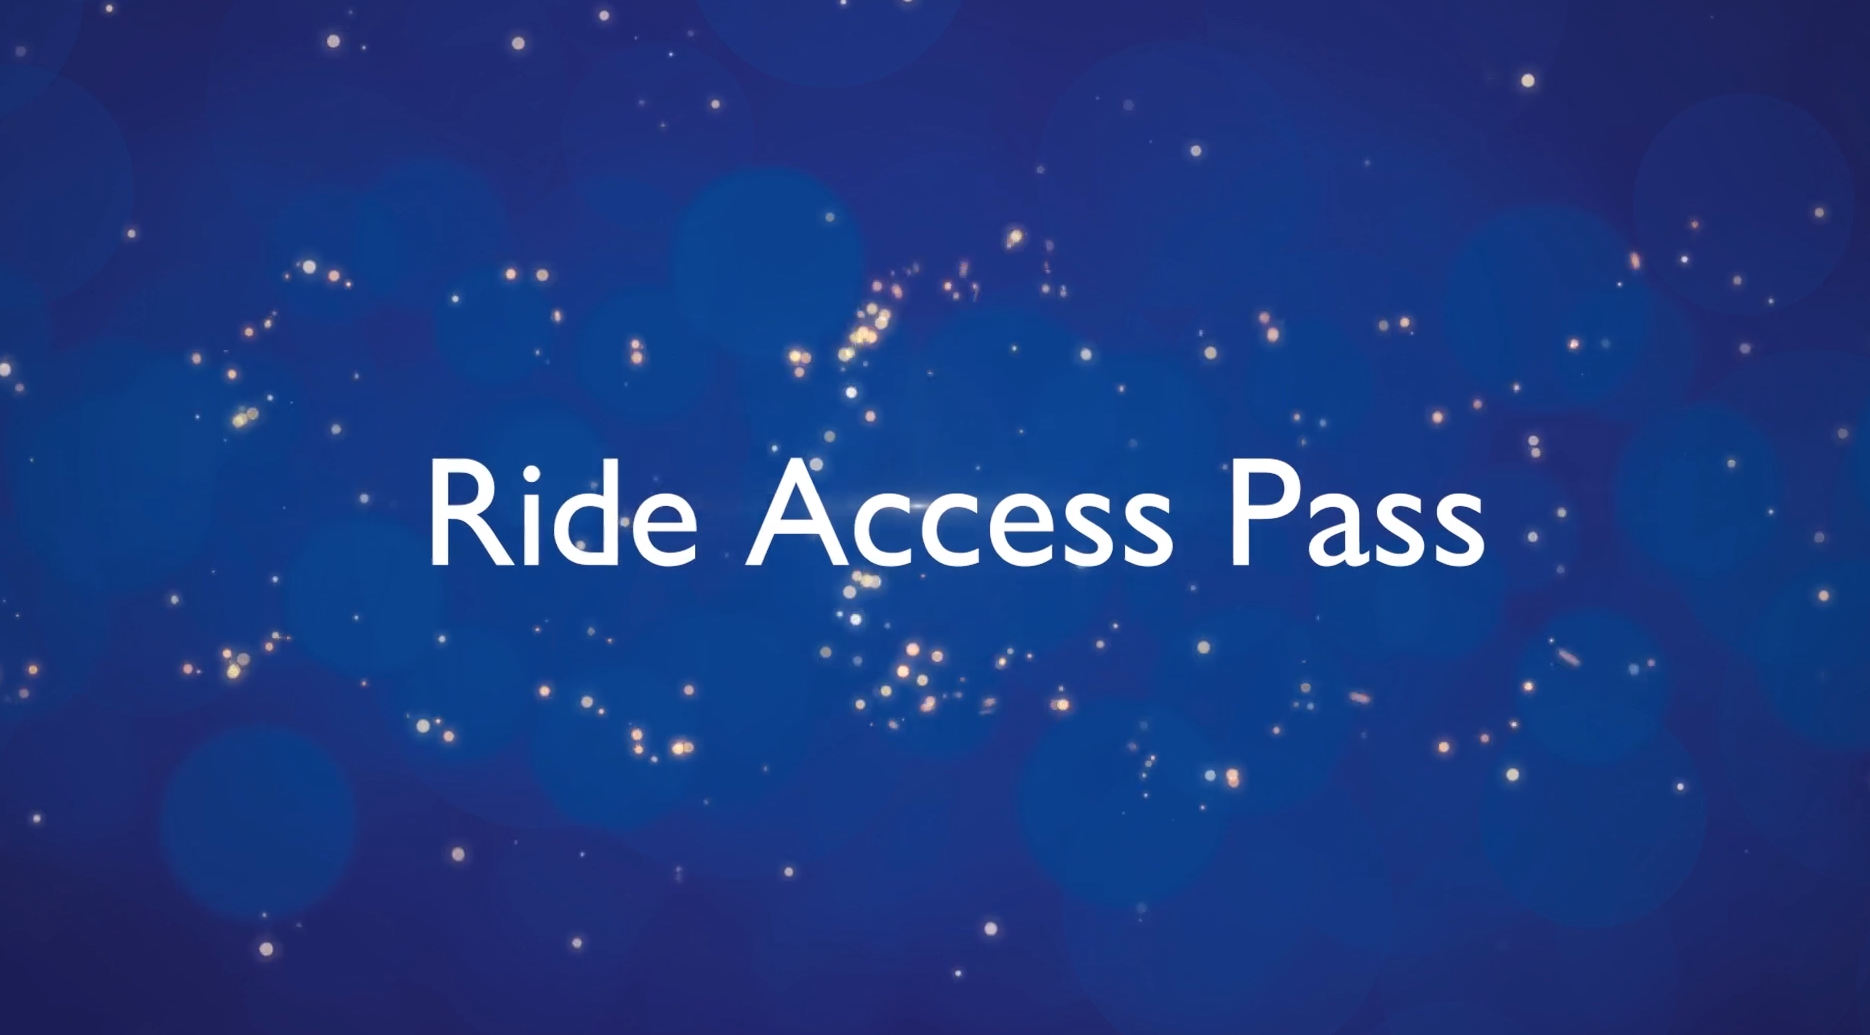 Ride Access Pass - Merlin Entertainments Accessibility Video